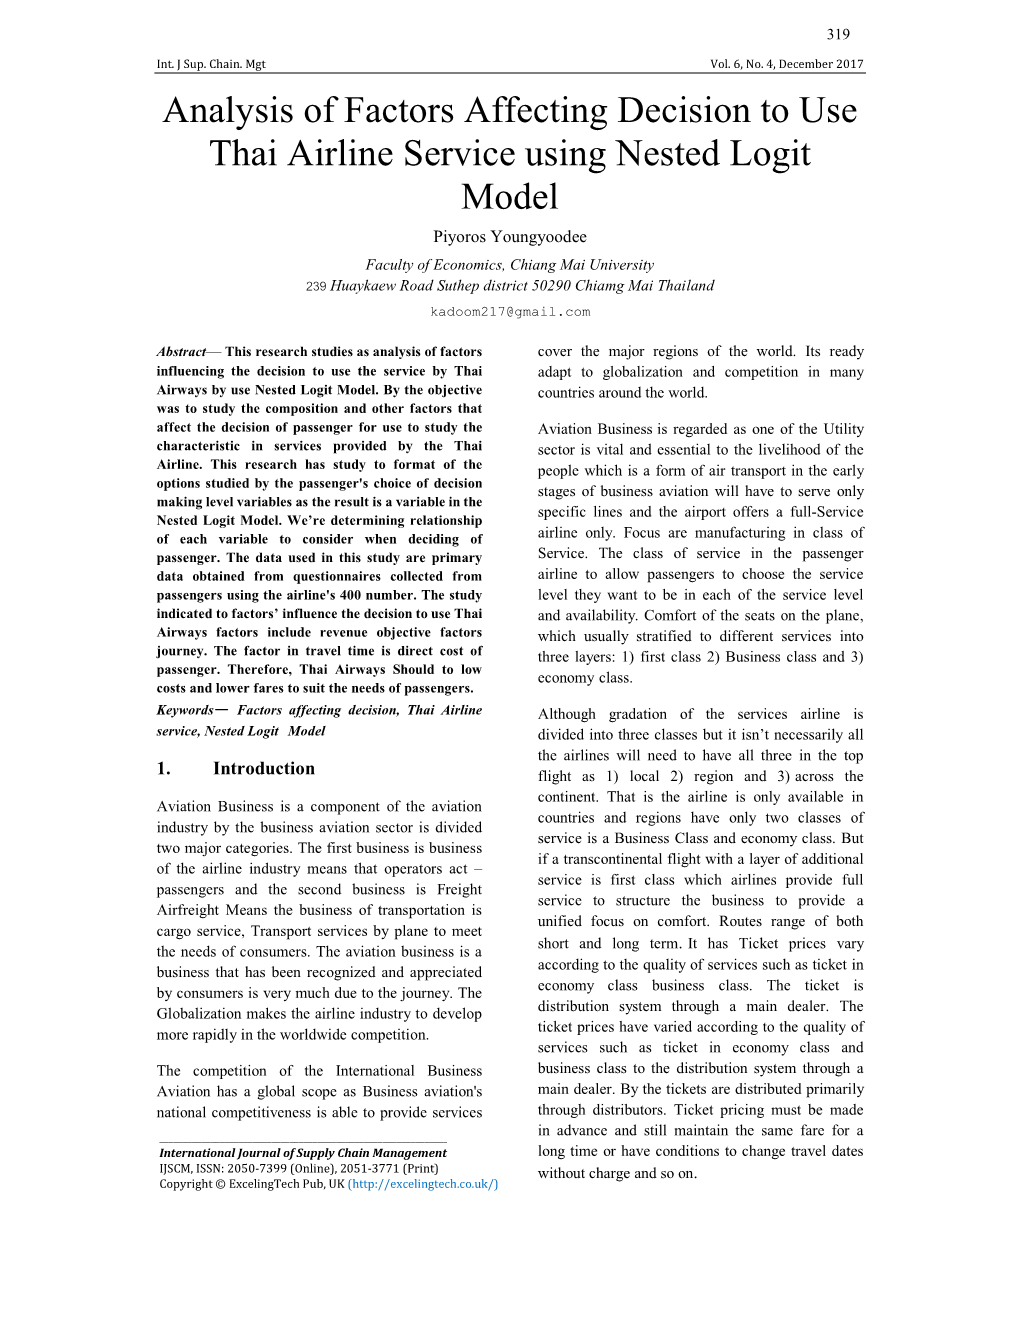 Analysis of Factors Affecting Decision to Use Thai Airline Service Using